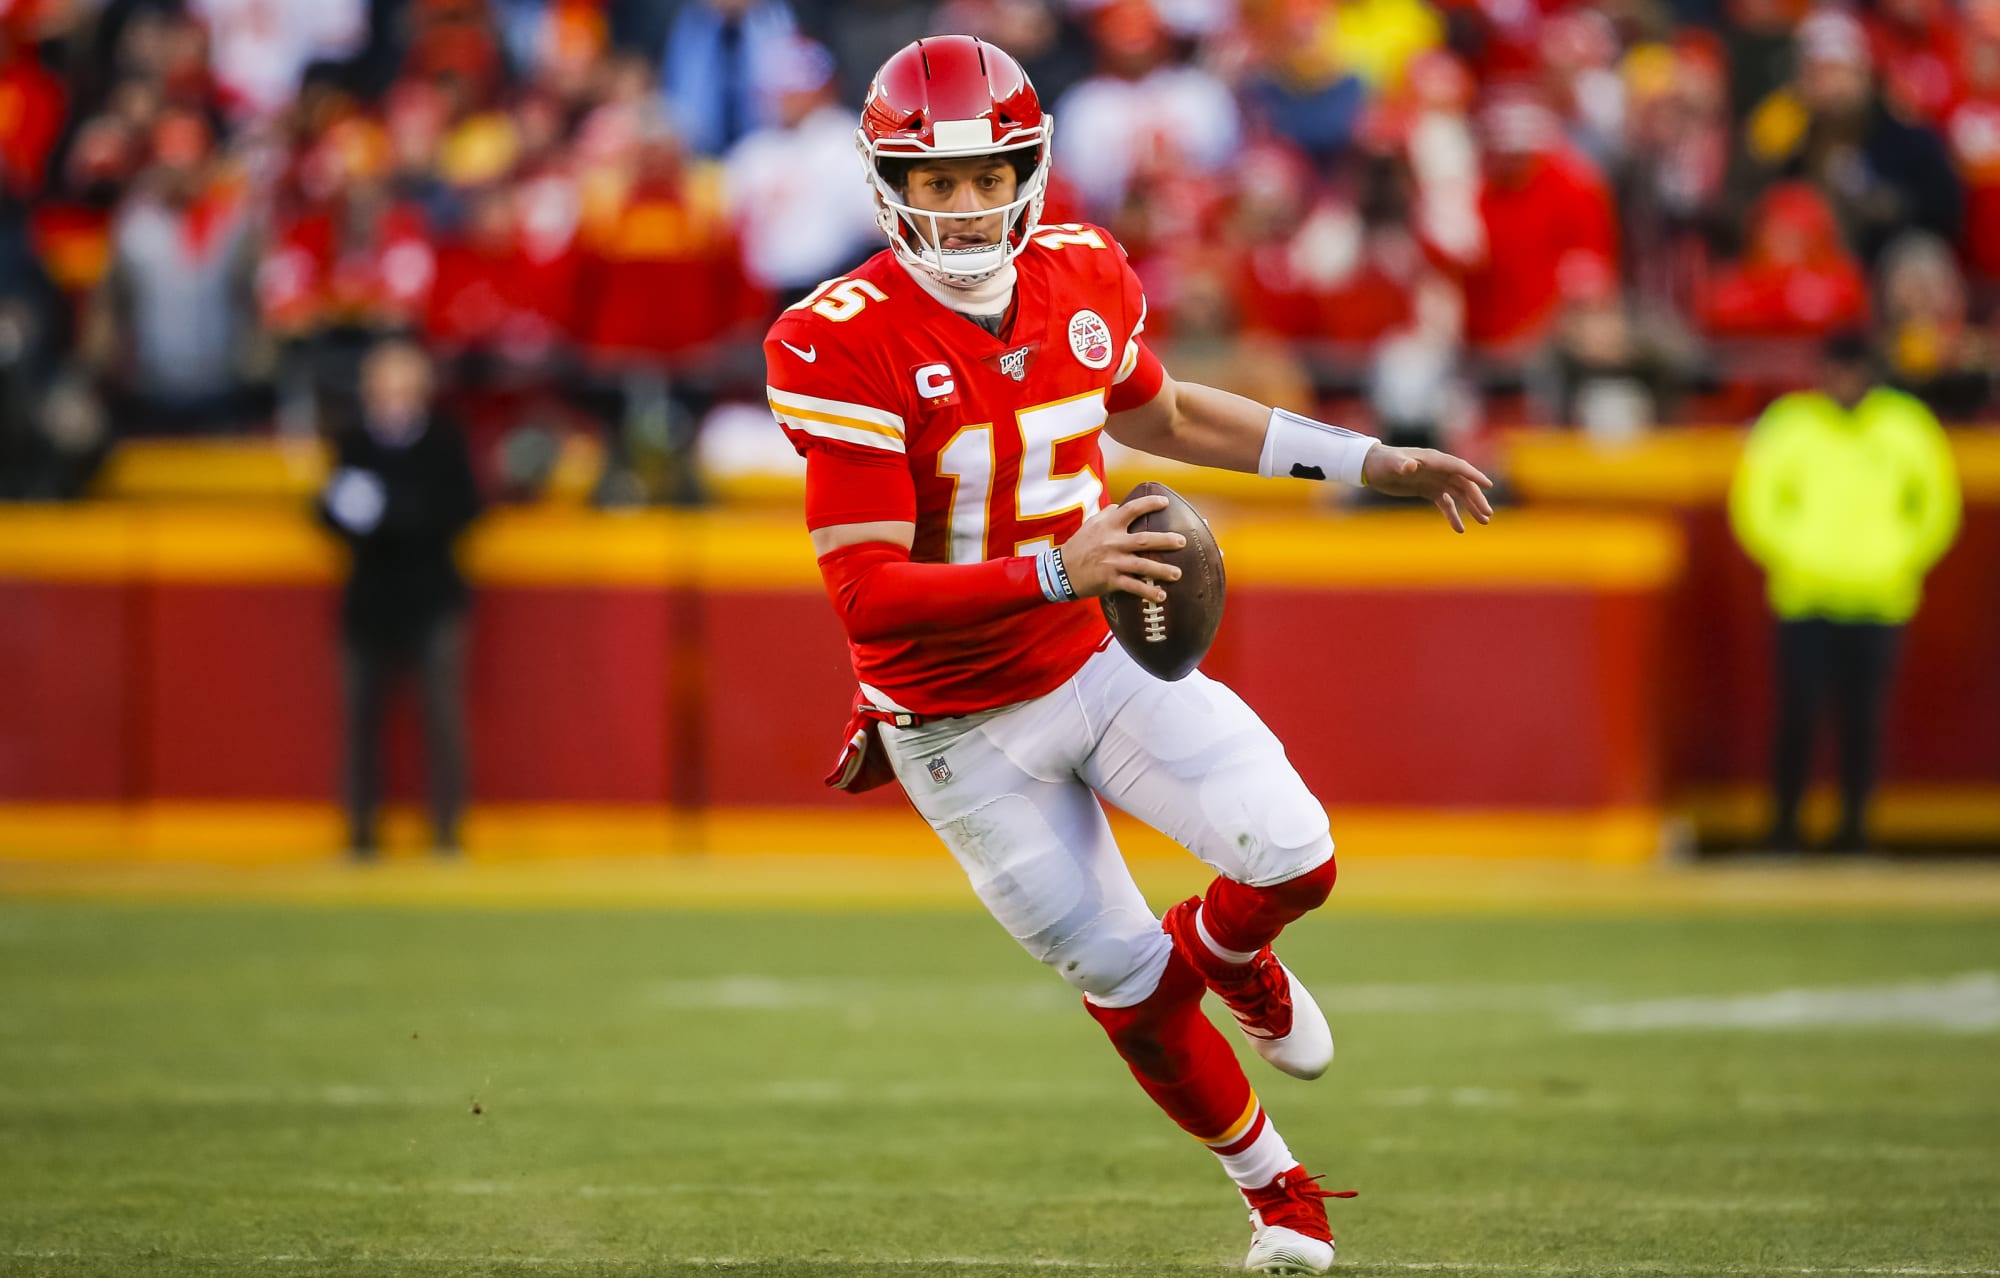 Kansas City Chiefs 2020 schedule release: Games, dates and times